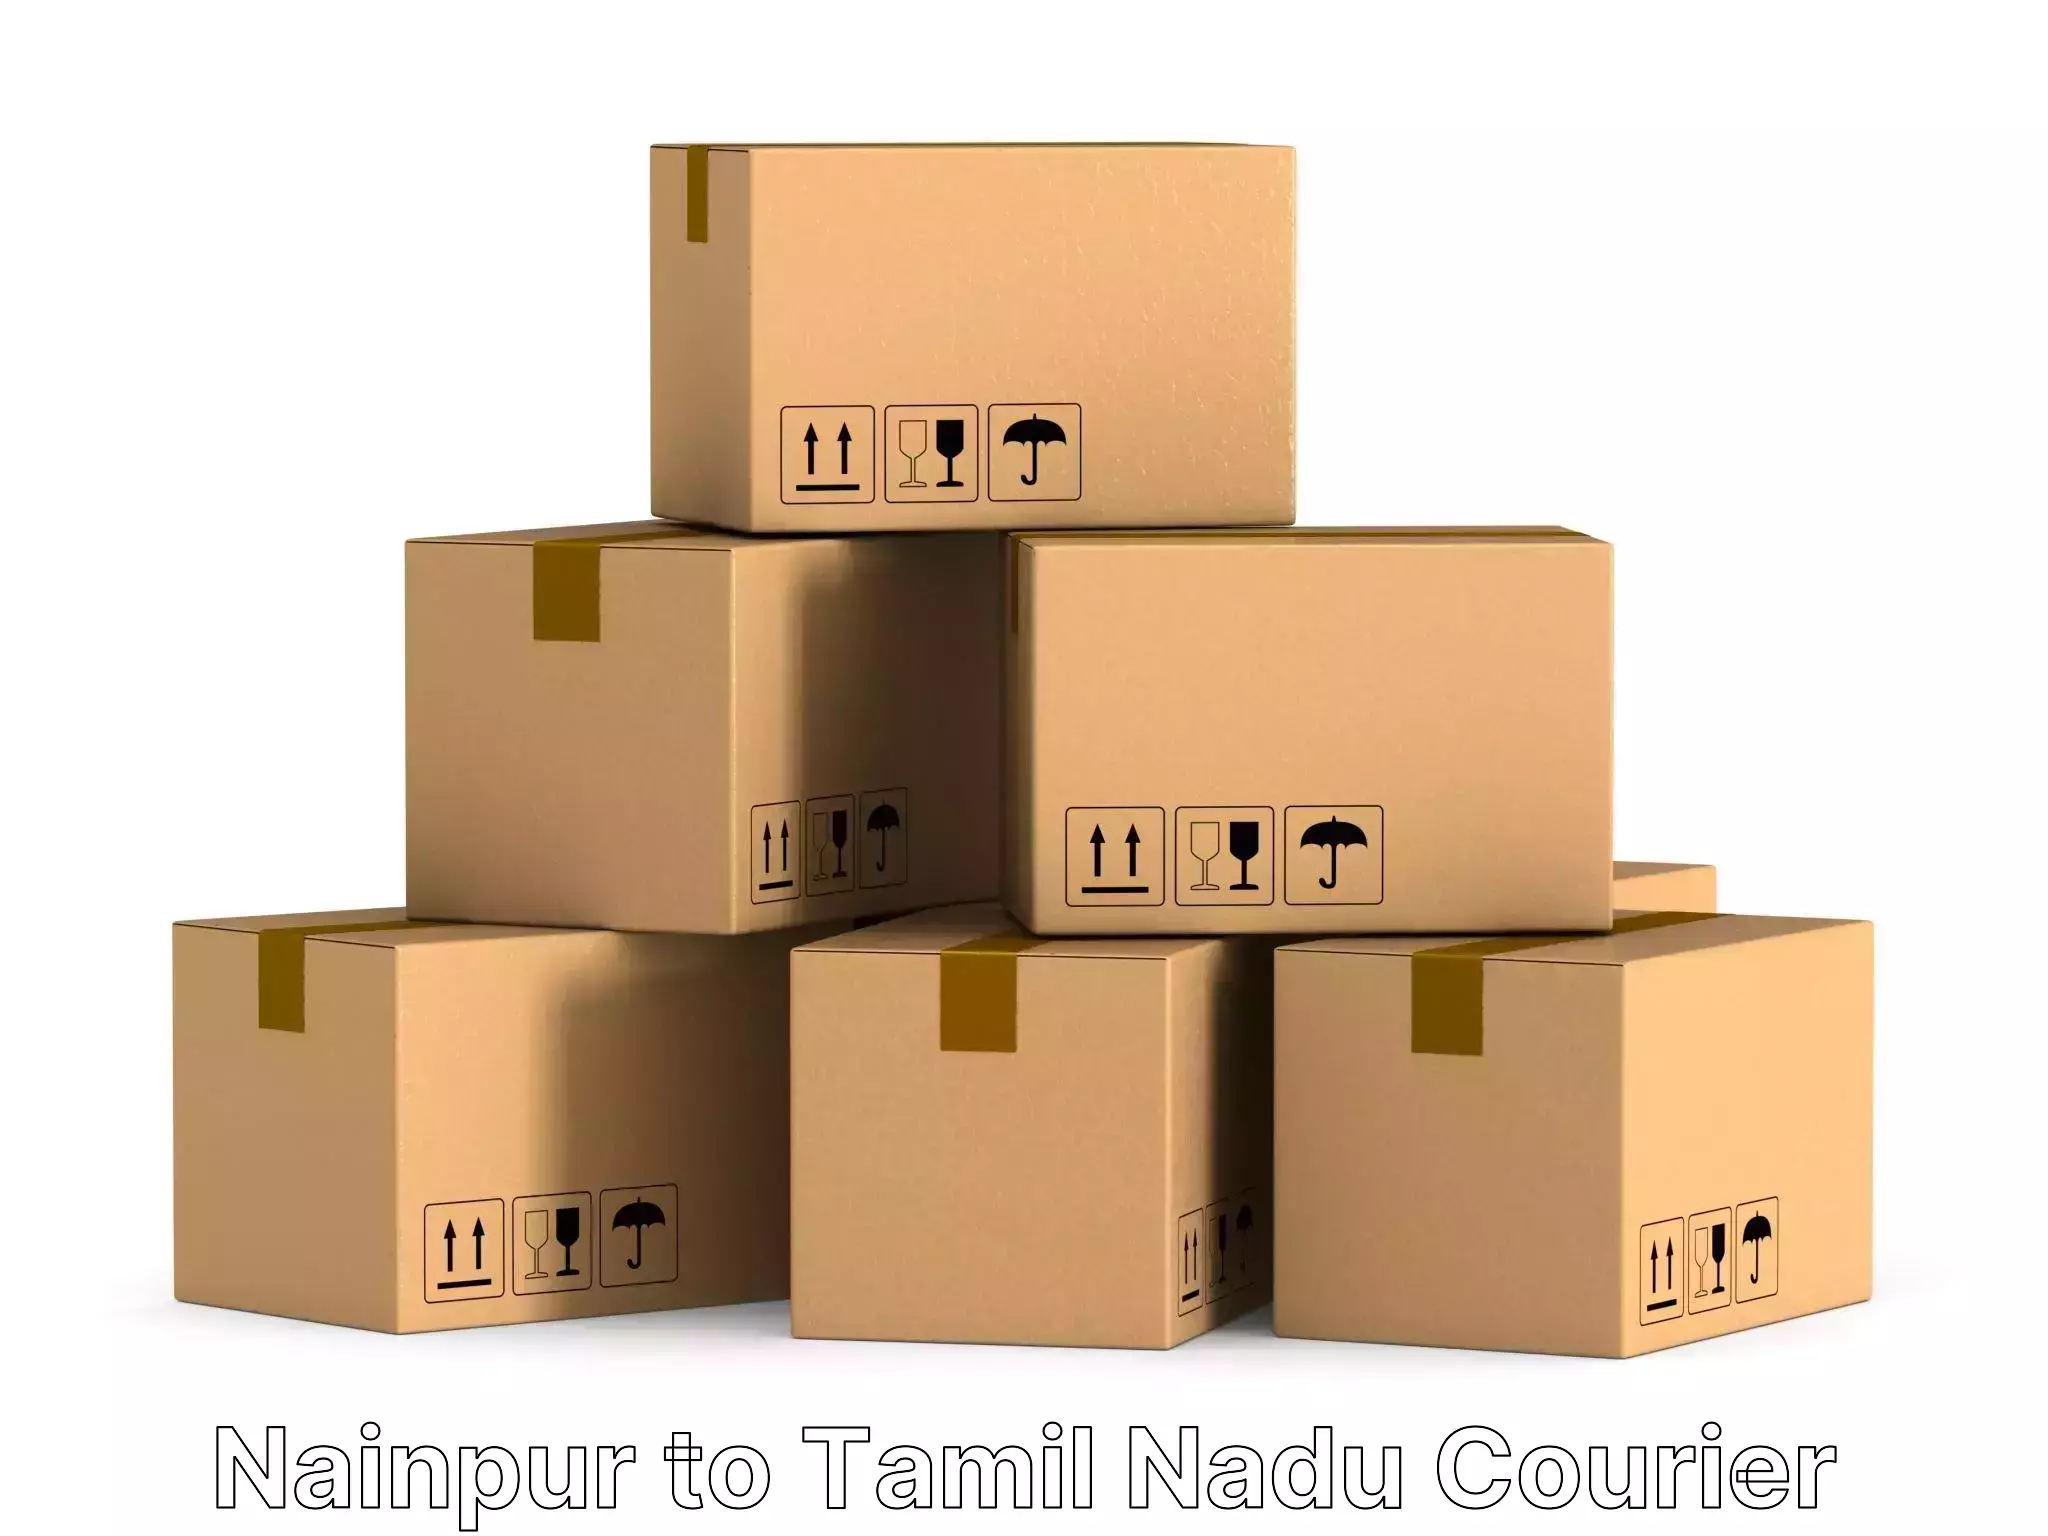 Quality household transport in Nainpur to Tuticorin Port